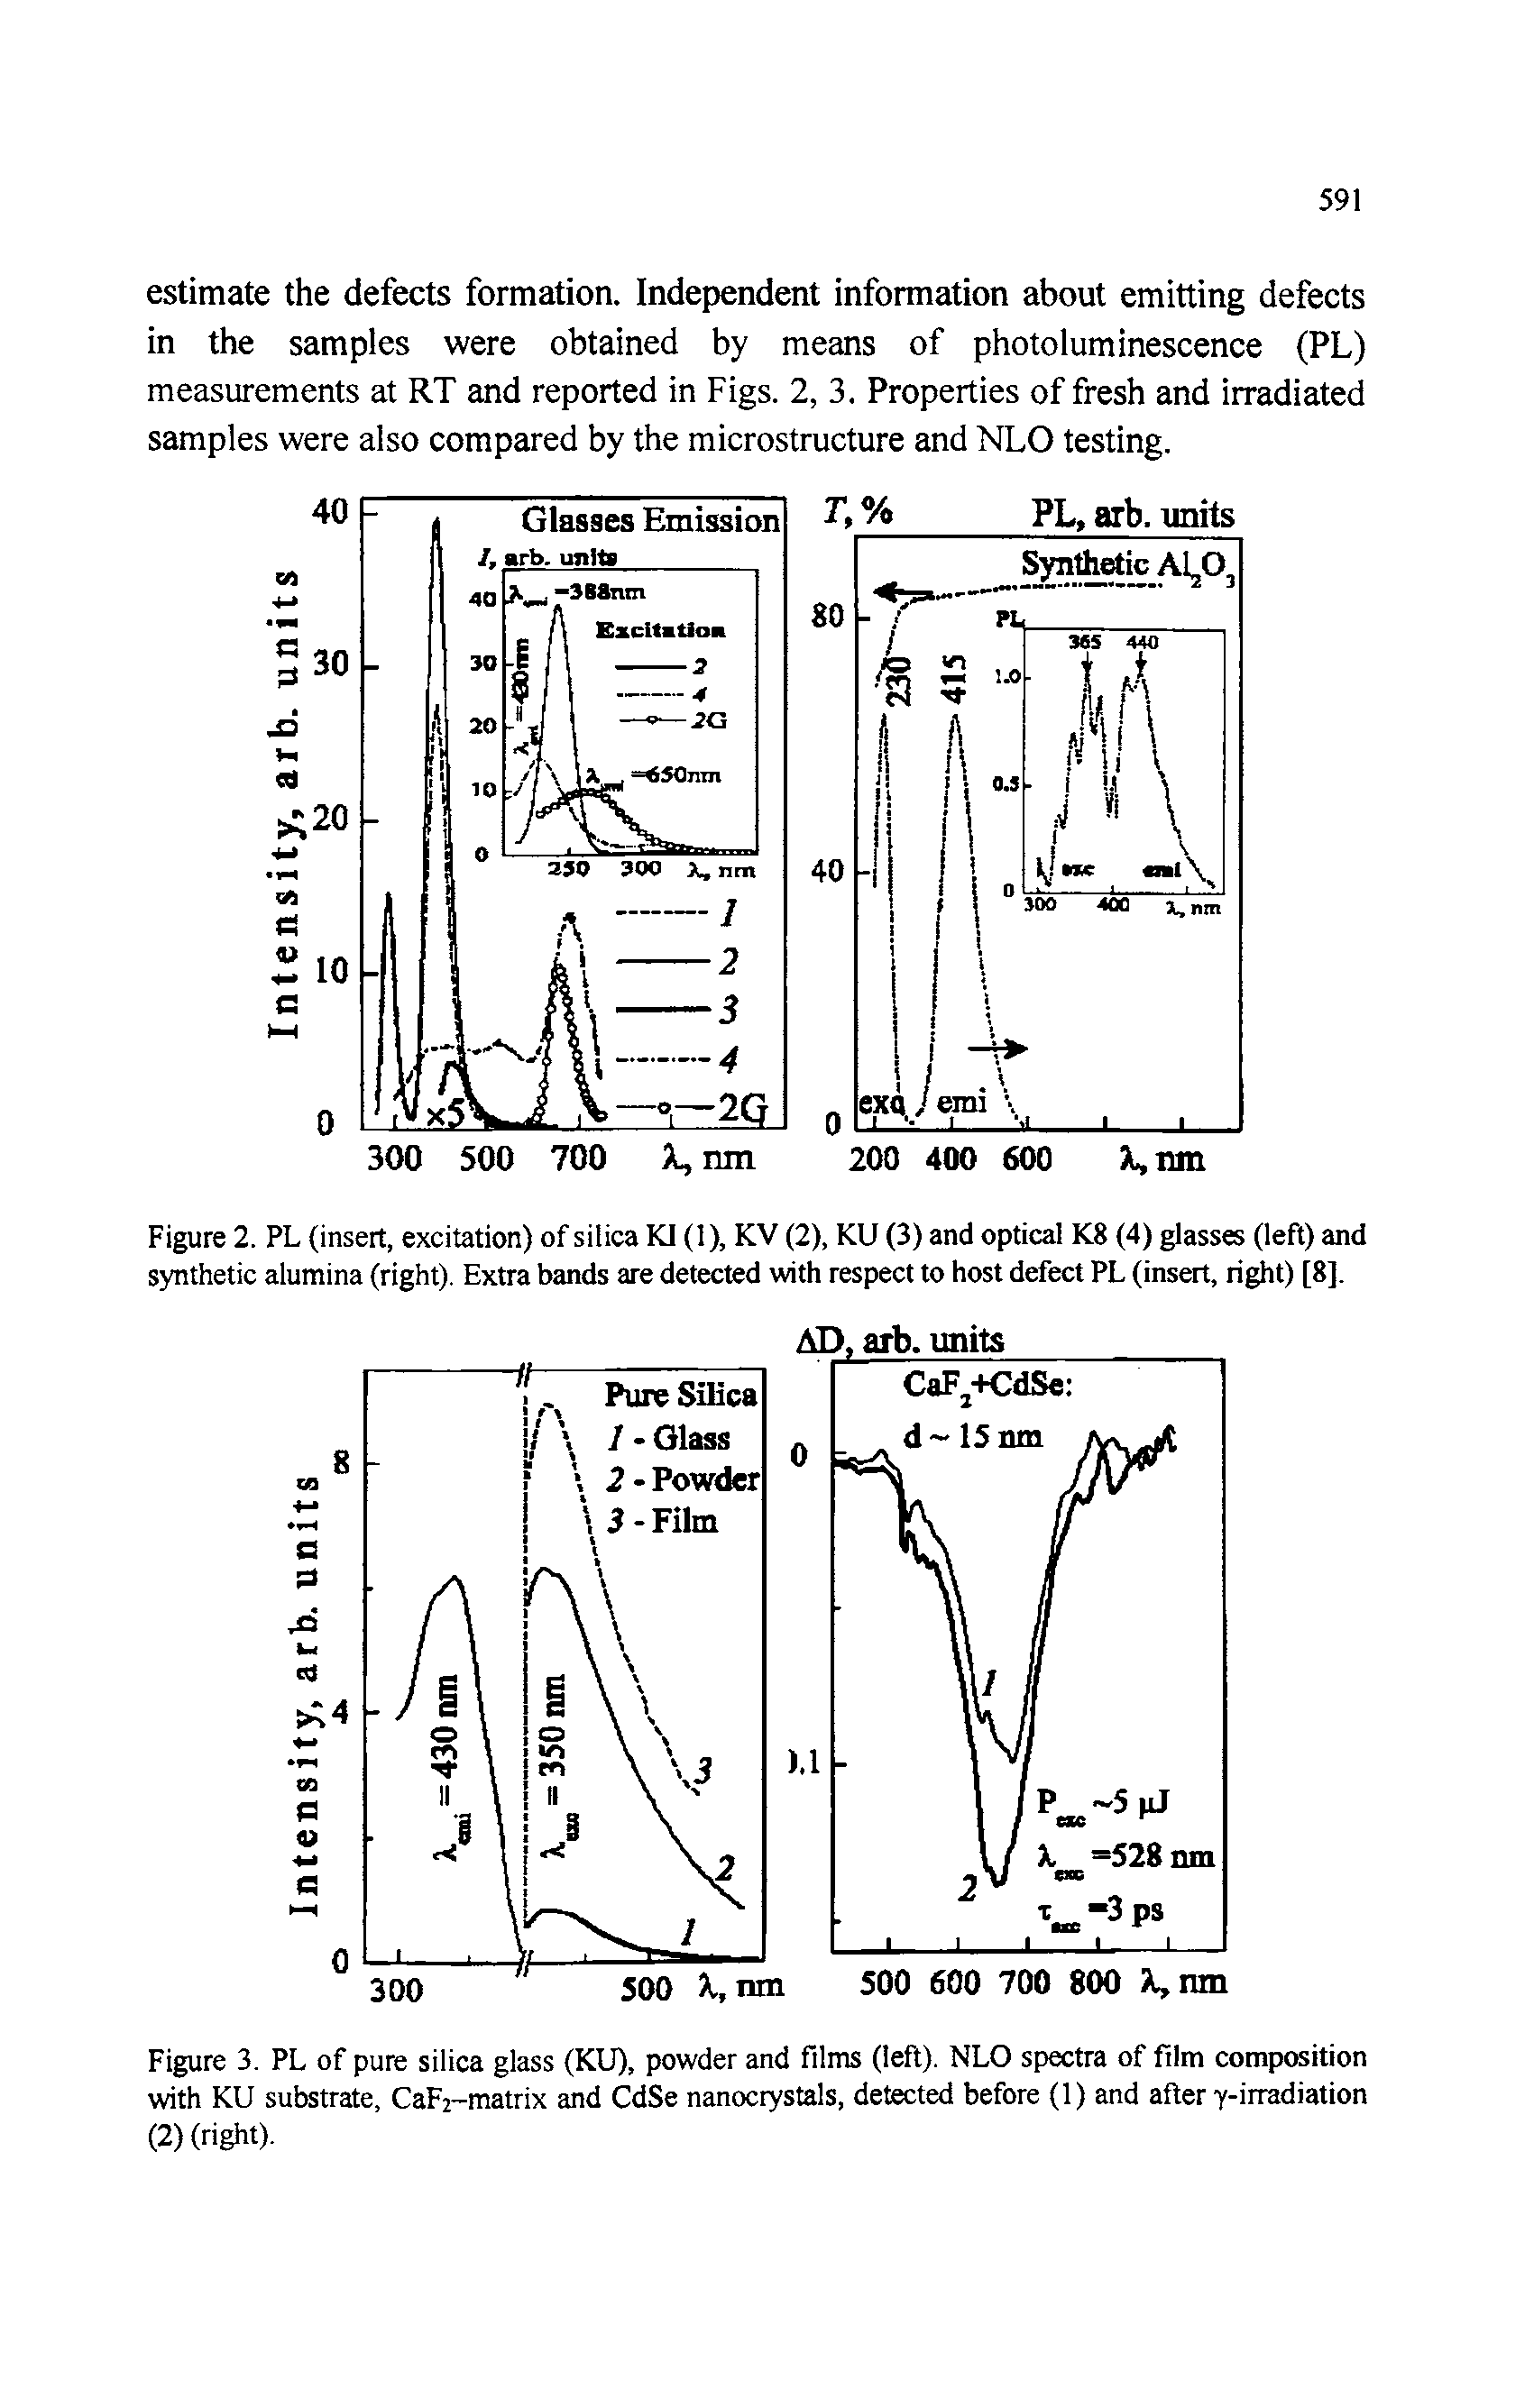 Figure 3. PL of pure silica glass (KU), powder and films (left). NLO spectra of film composition with KU substrate, CaFi-matrix and CdSe nanocrystals, detected before (1) and after y-irradiation (2) (right).